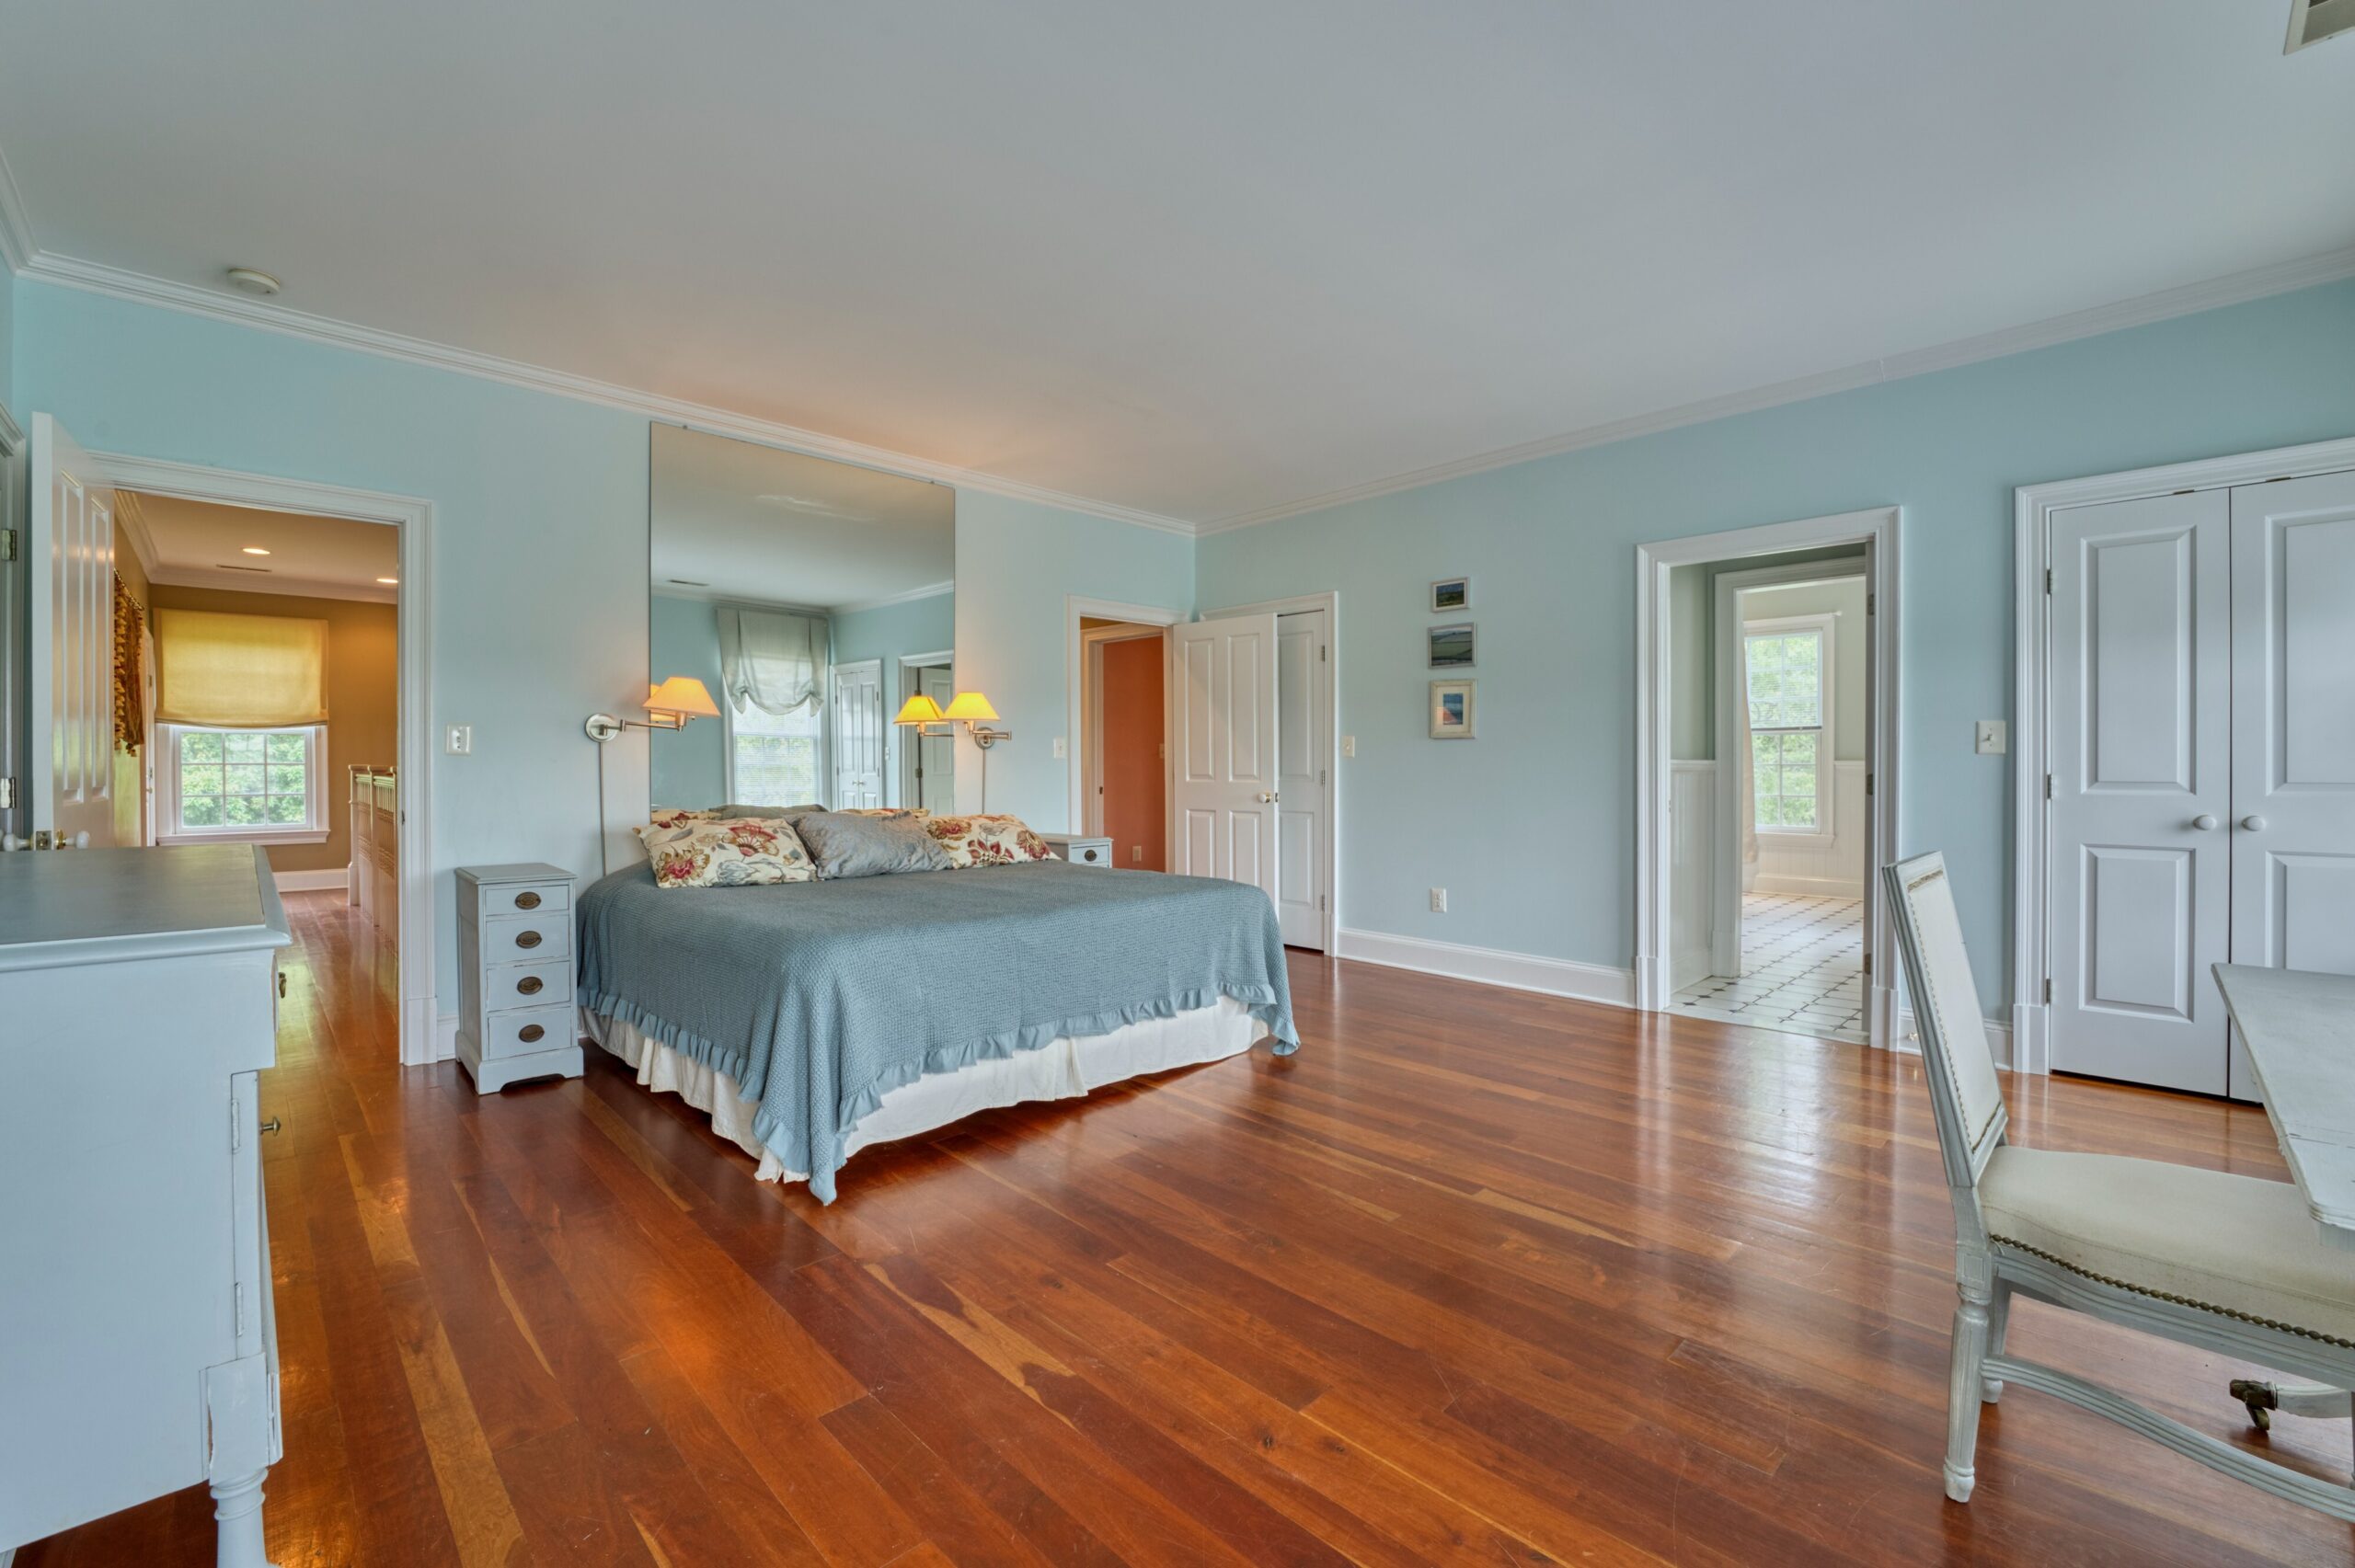 Professional interior photo of 15203 Clover Hill Road - showing the primary bedroom